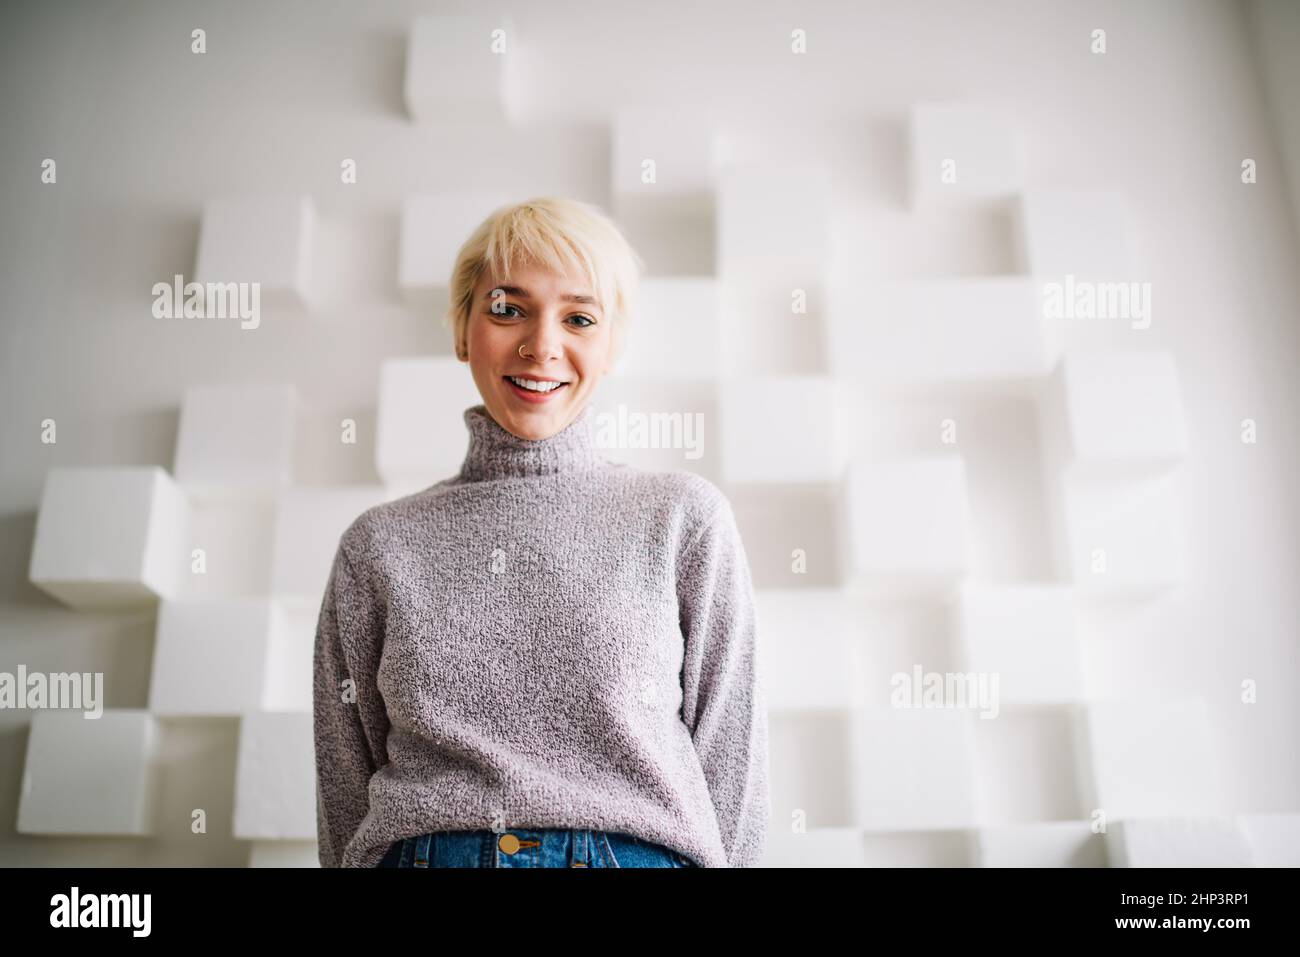 Happy woman near wall with cube decorations Stock Photo